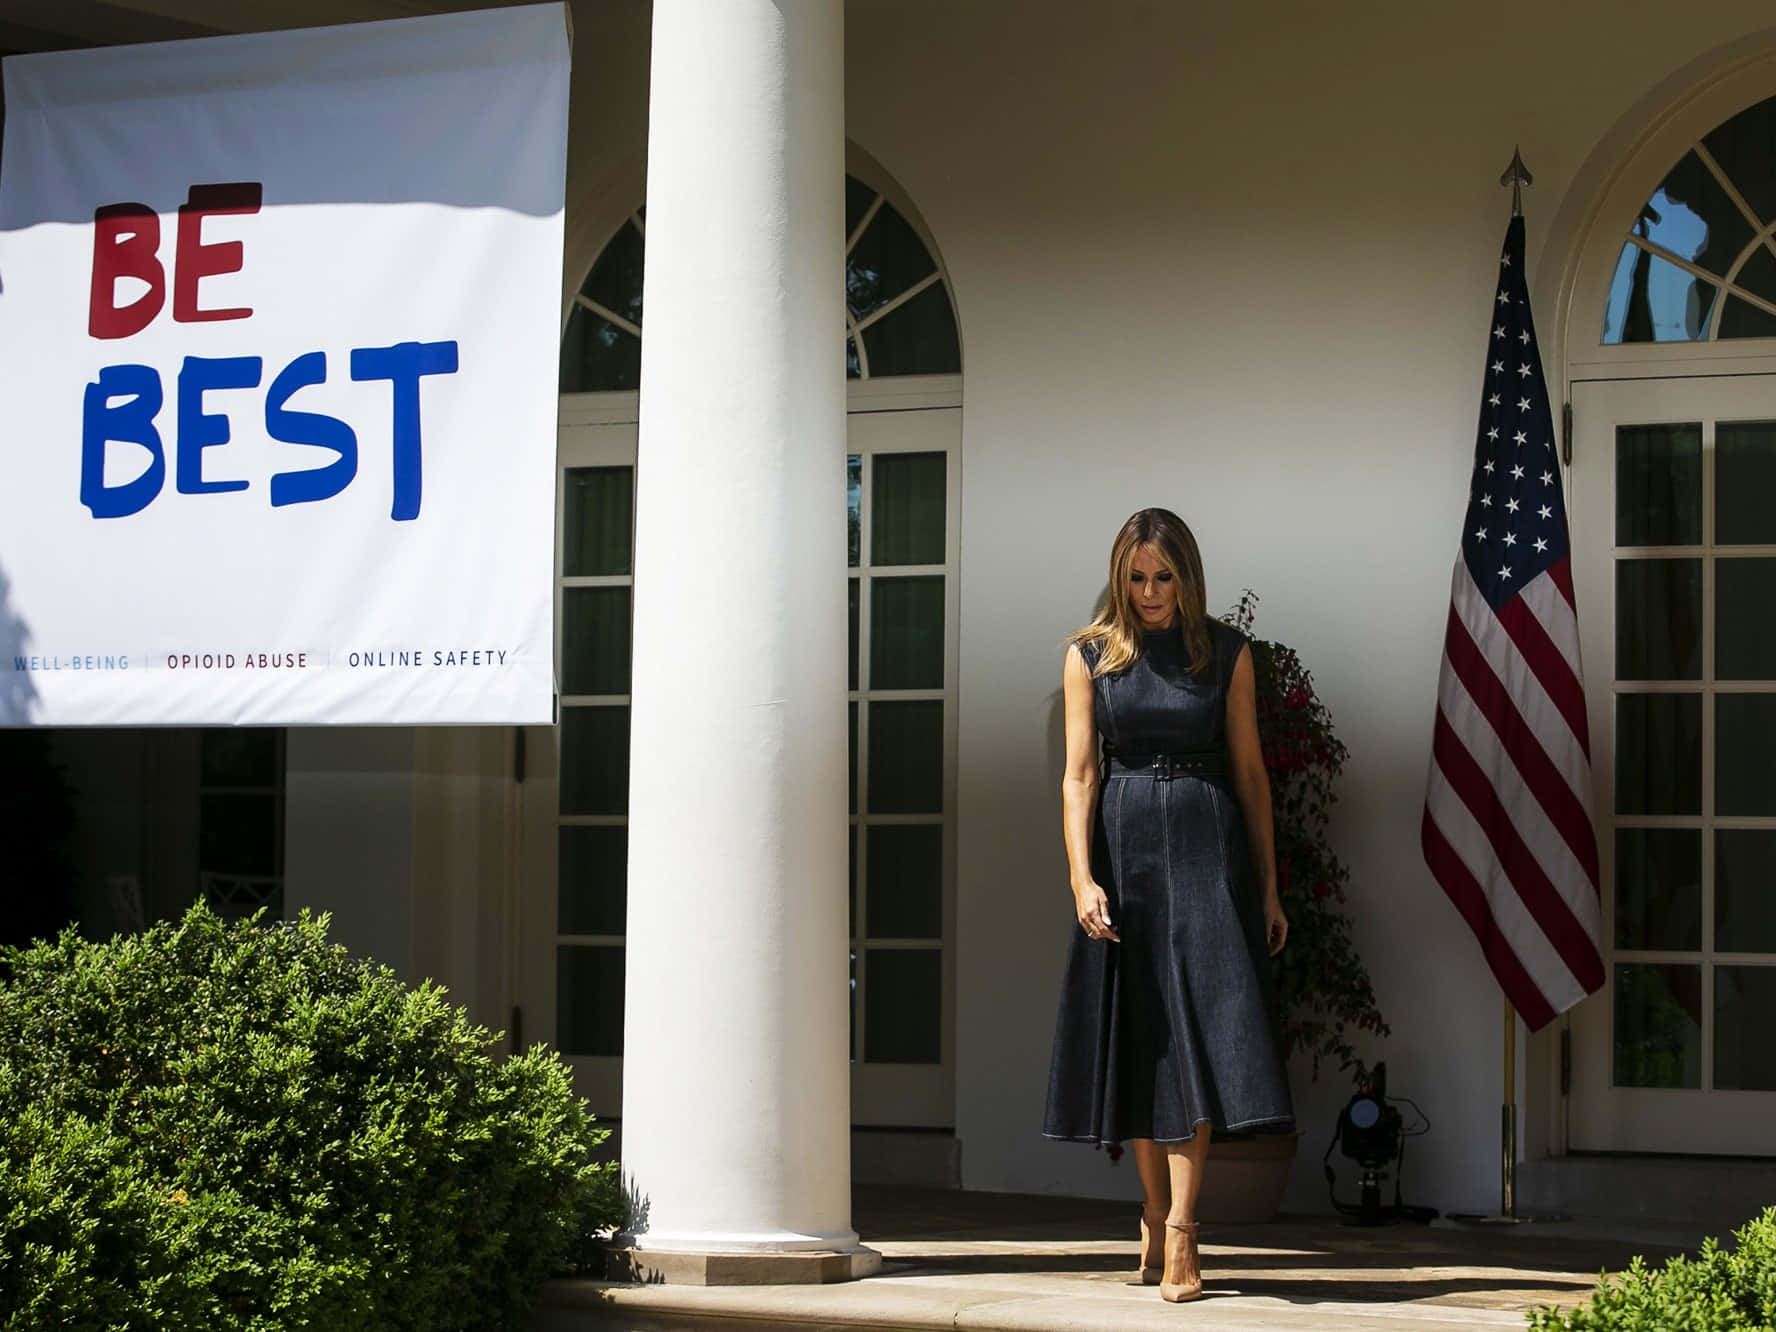 (melania Trump Appears On A Computer Or Mobile Wallpaper, Standing In Front Of A Banner With The Words 